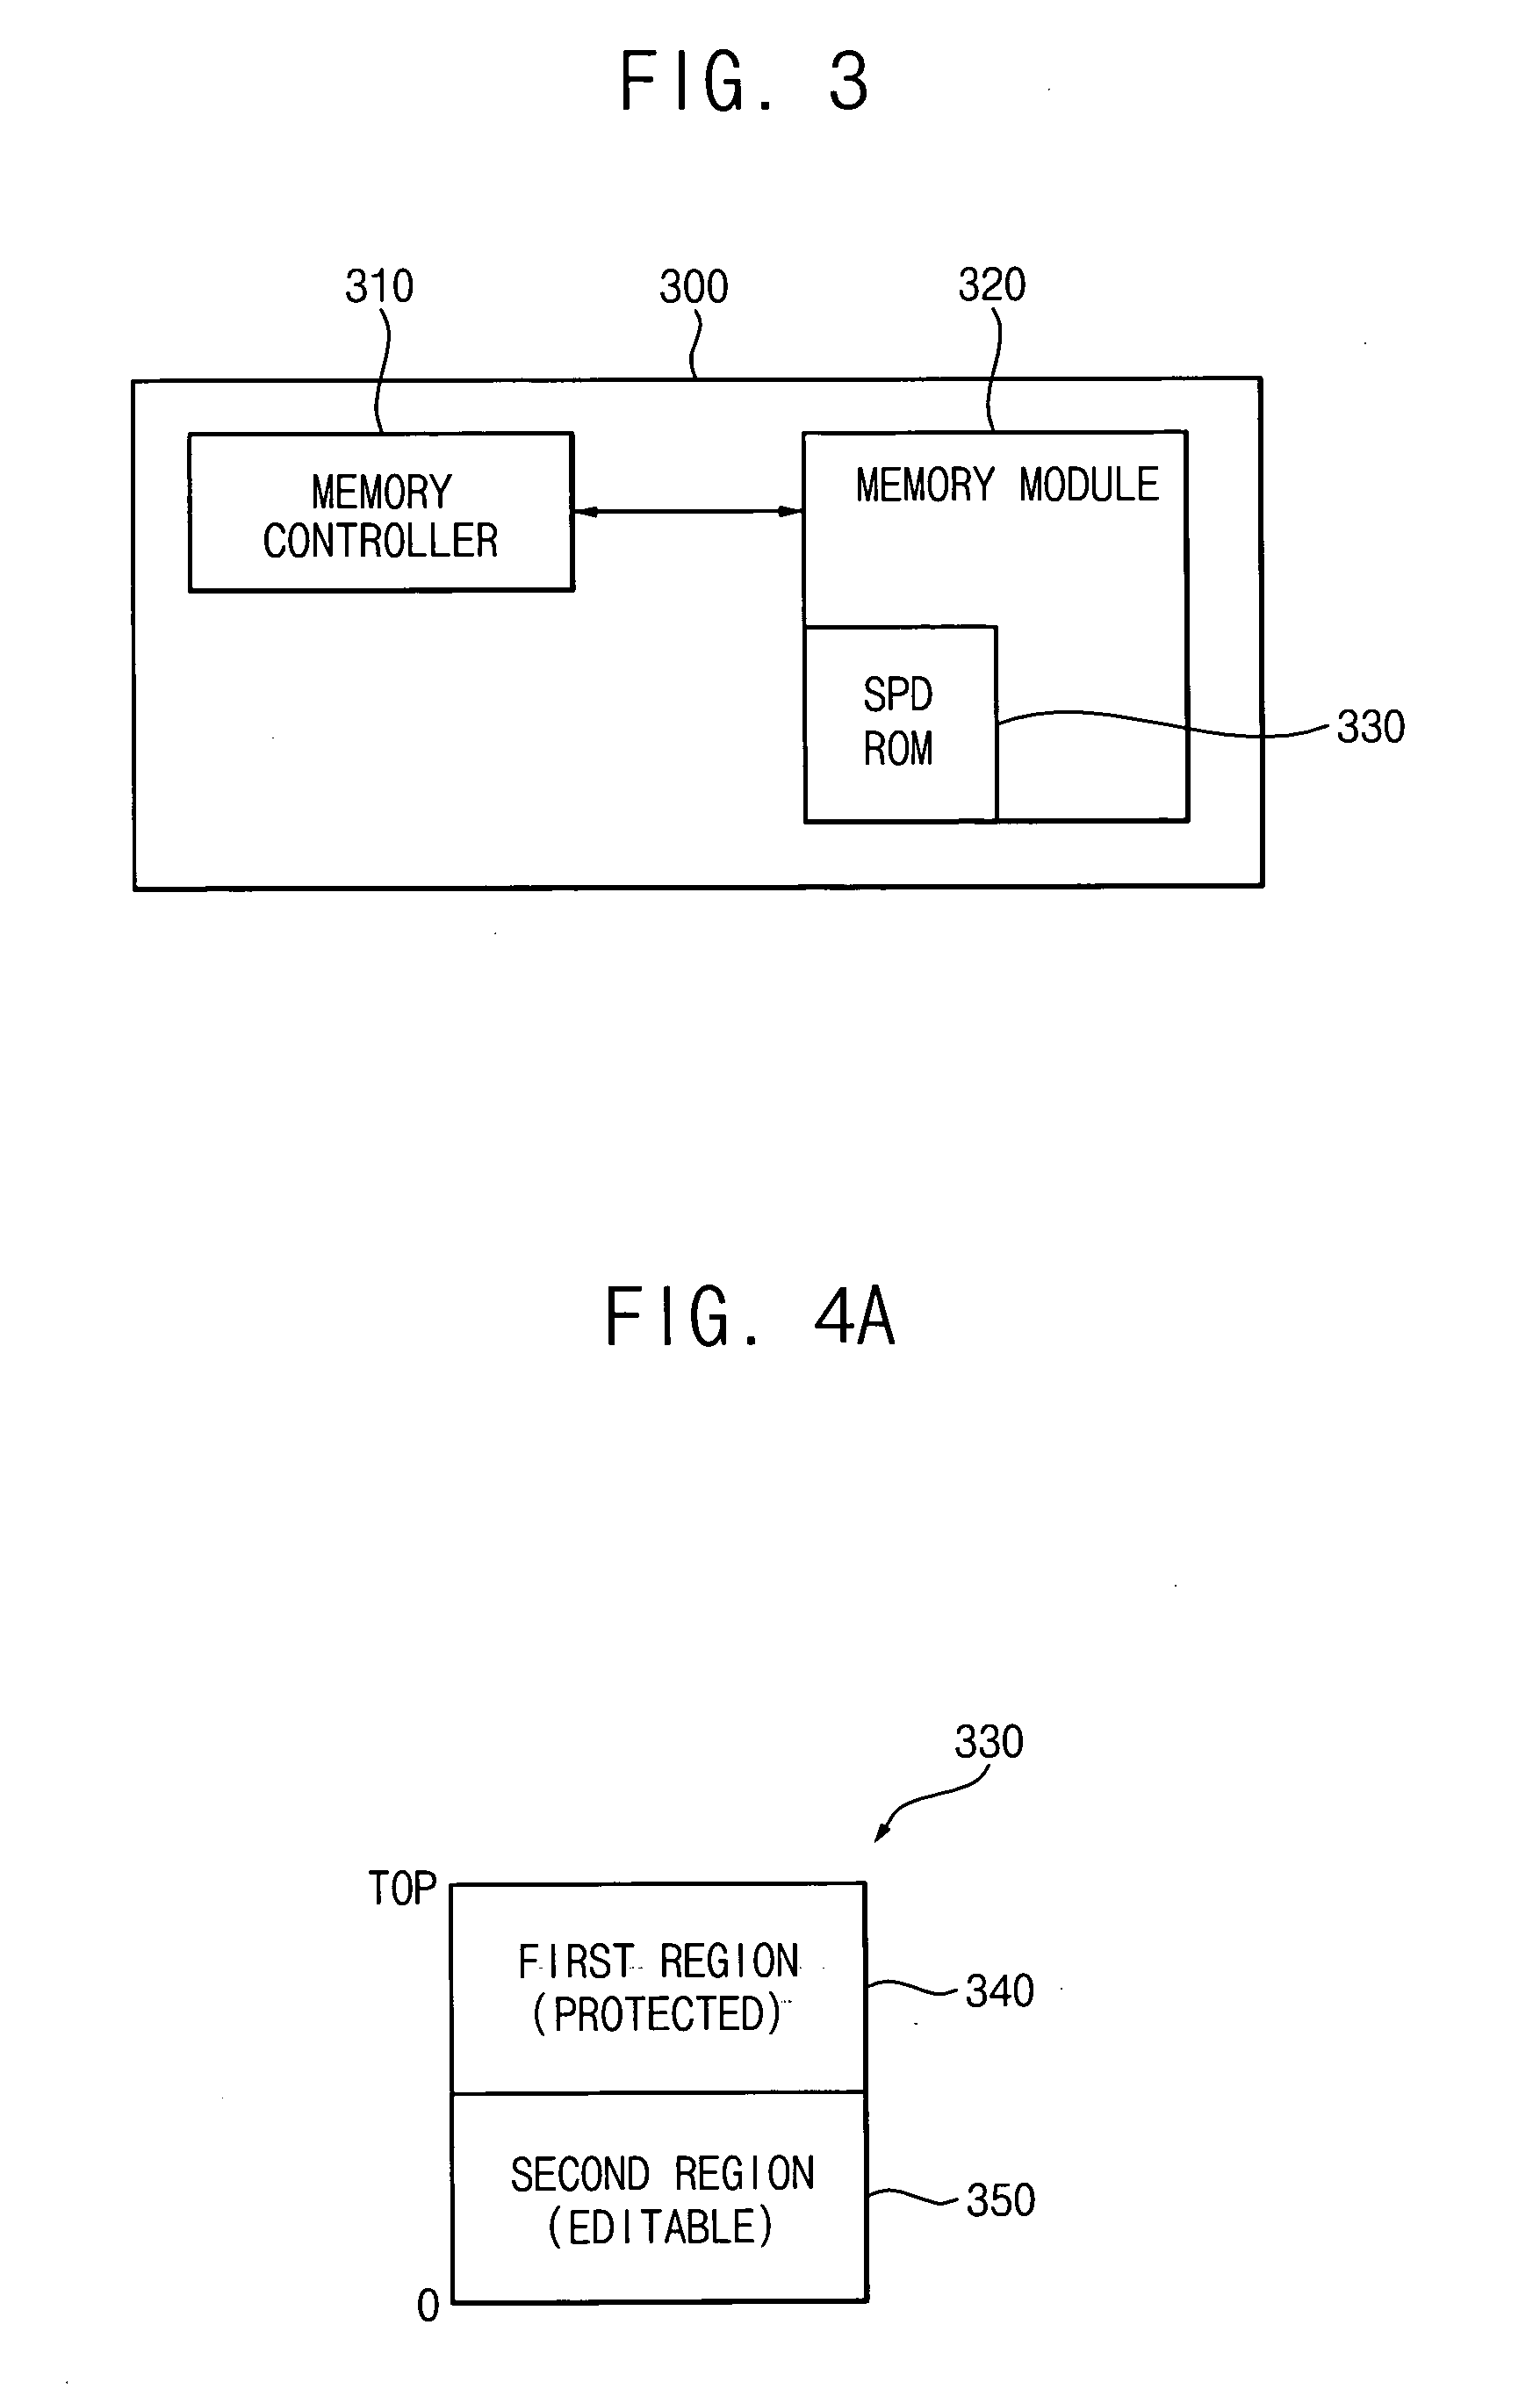 Memory module system using a partitioned serial presence detect memory